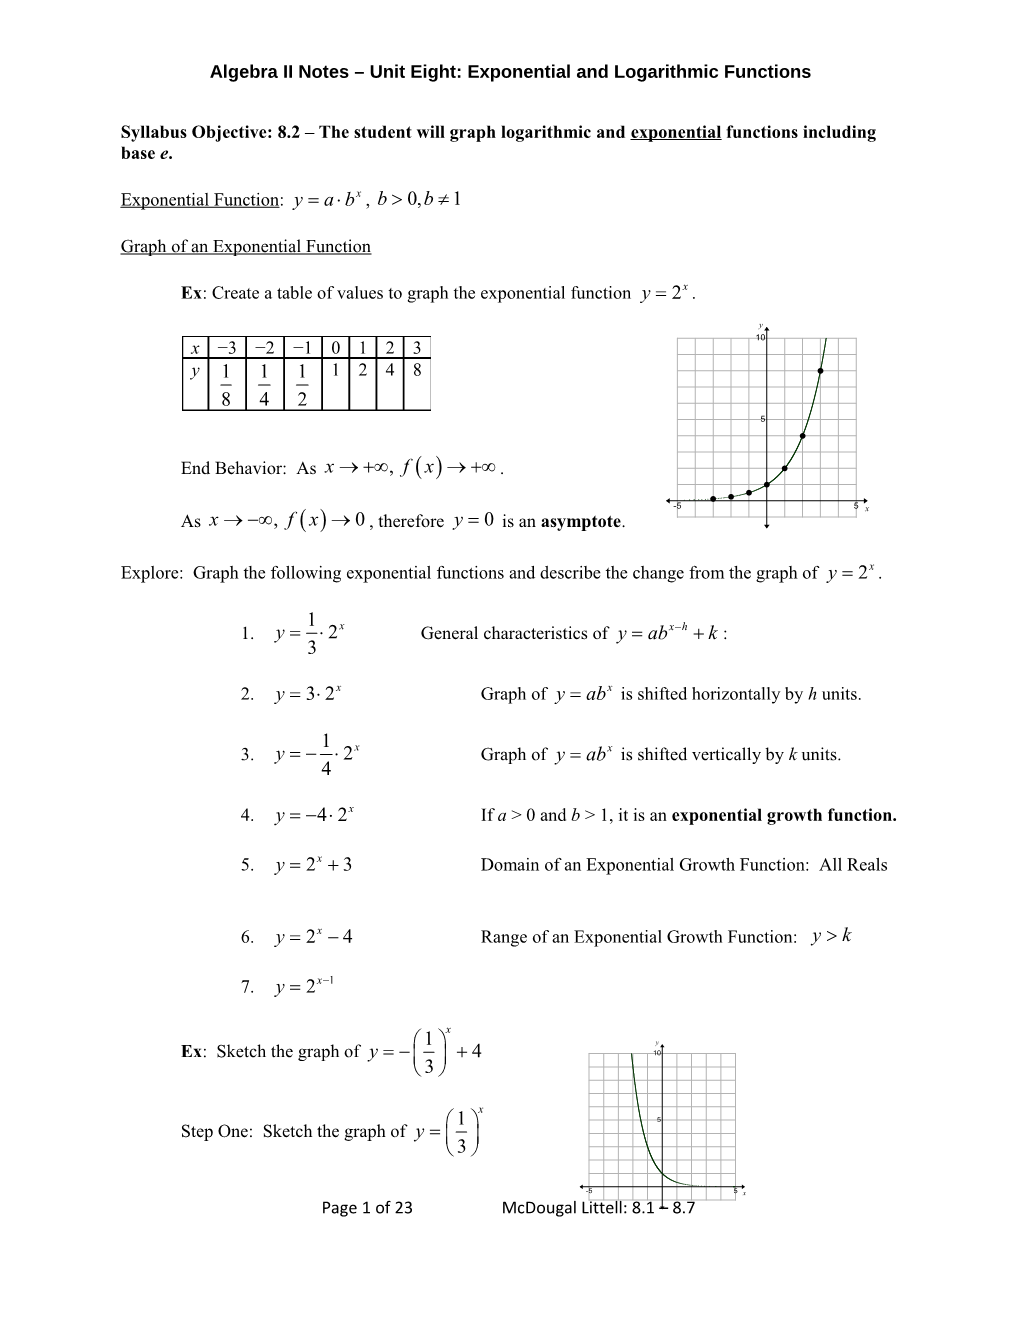 Algebra II Notes Unit Eight: Exponential and Logarithmic Functions